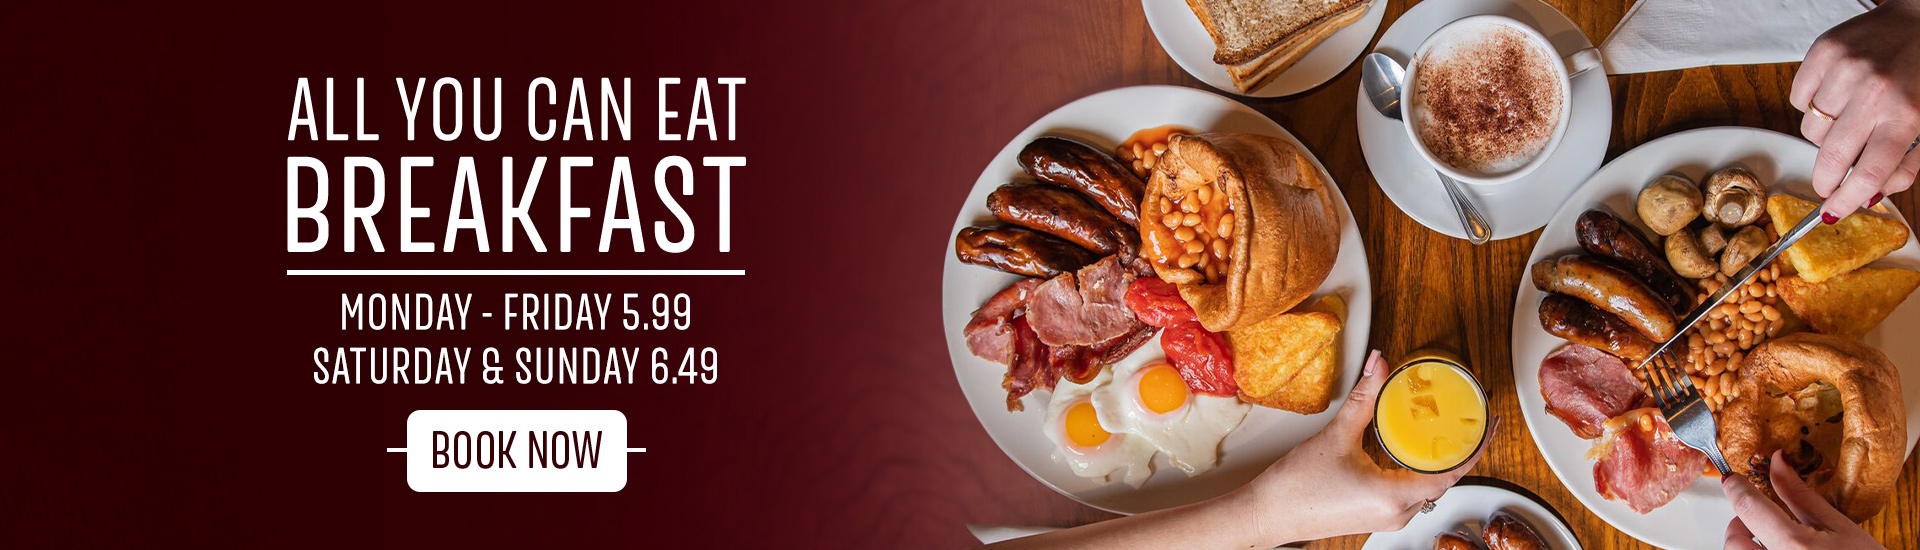 A promotional photograph of an All You Can Eat Breakfast at Toby Carvery, including sausages, hash browns, baked beans and fried egg.